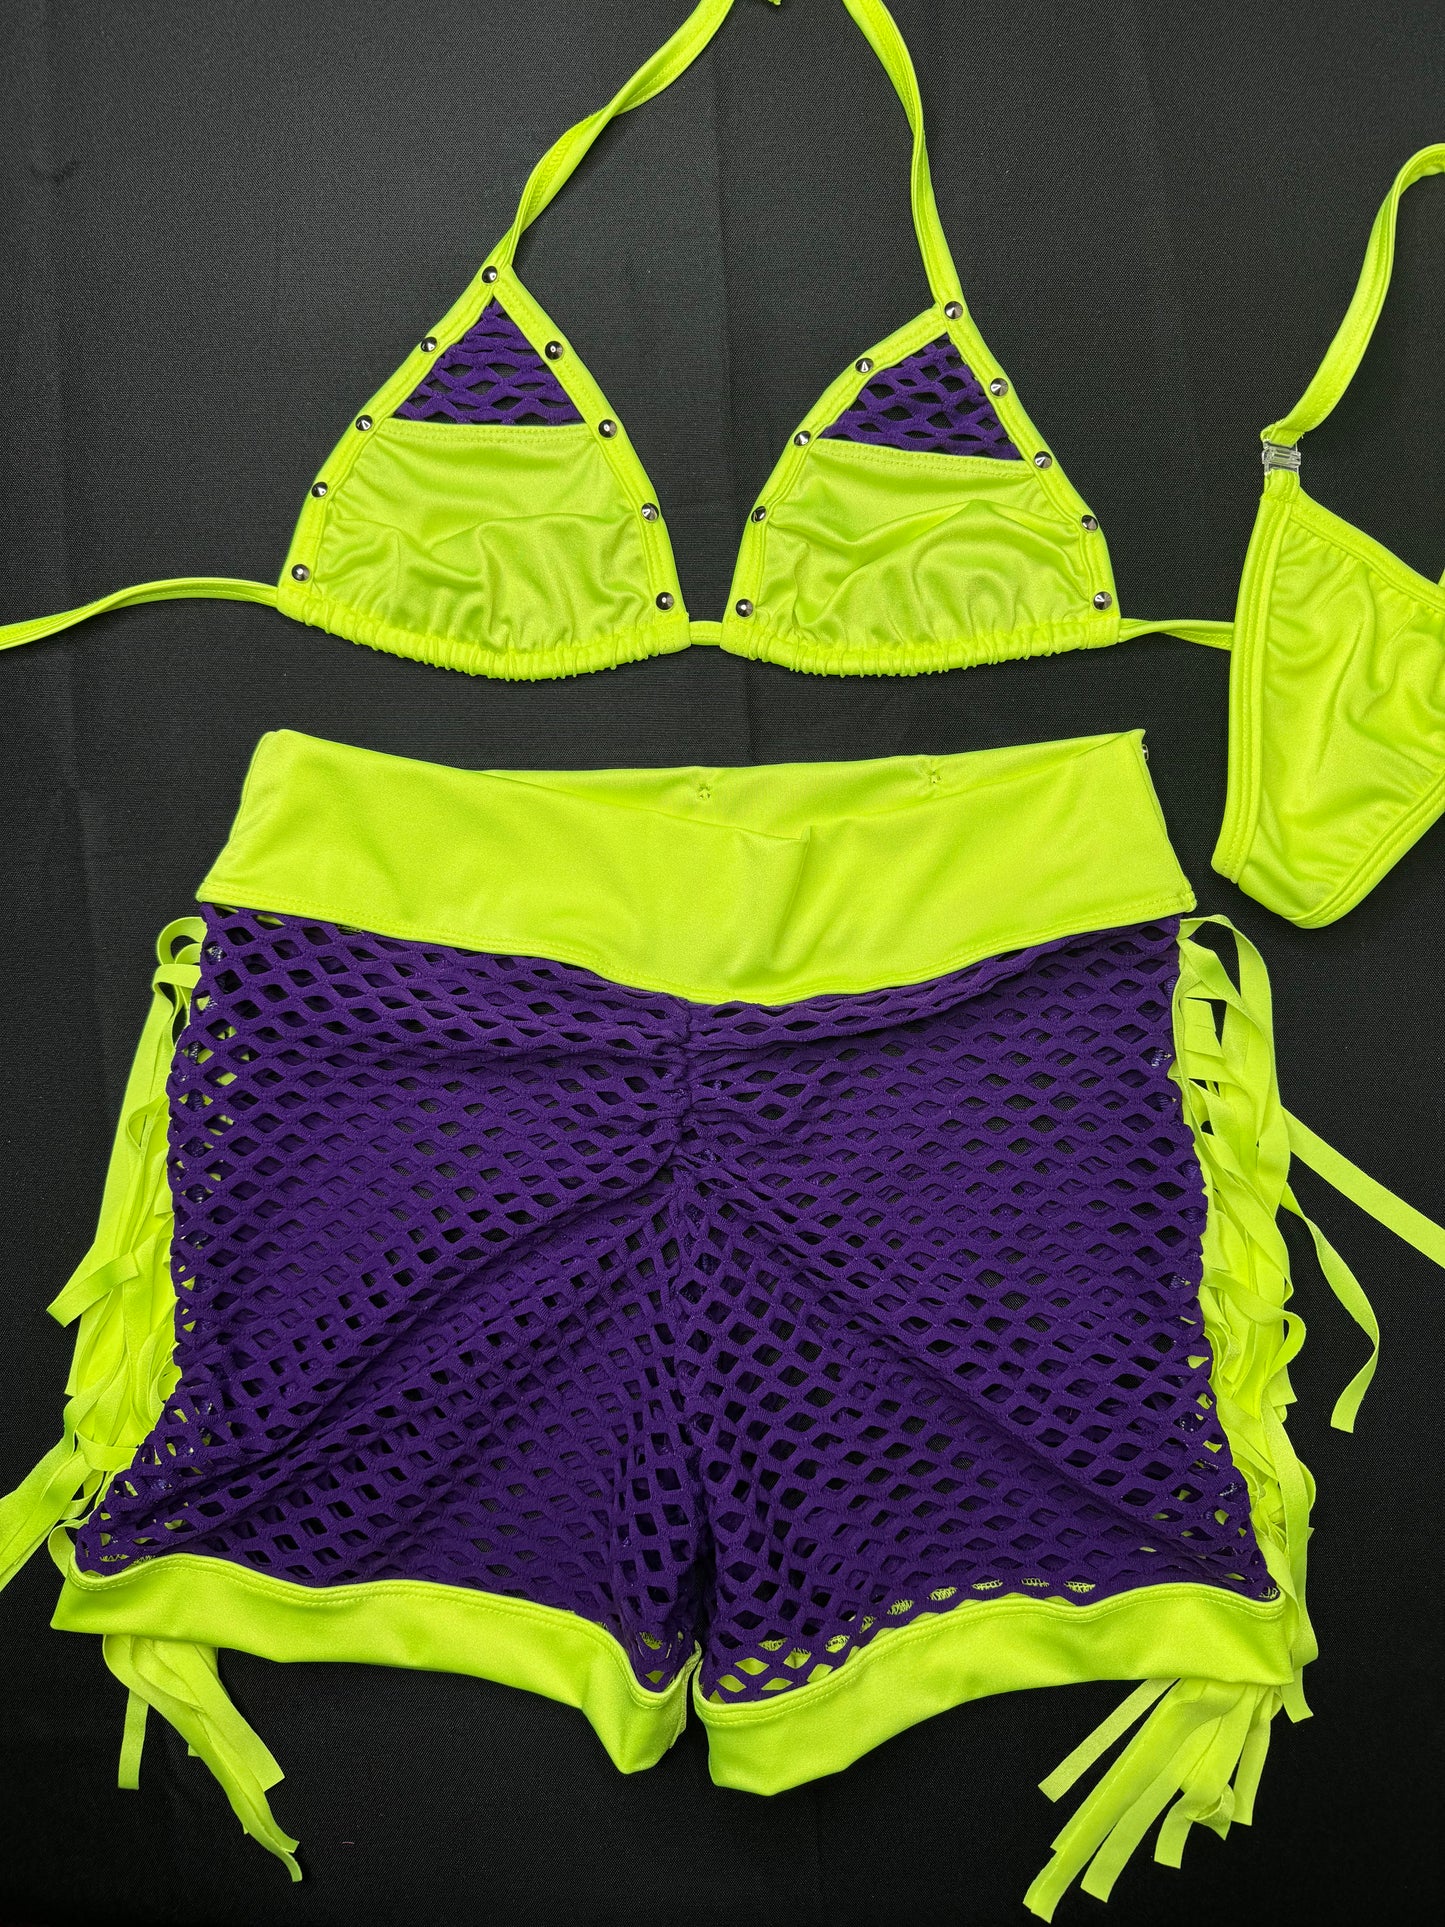 Neon Yellow/Purple Fringe Two-Piece Lingerie Outfit